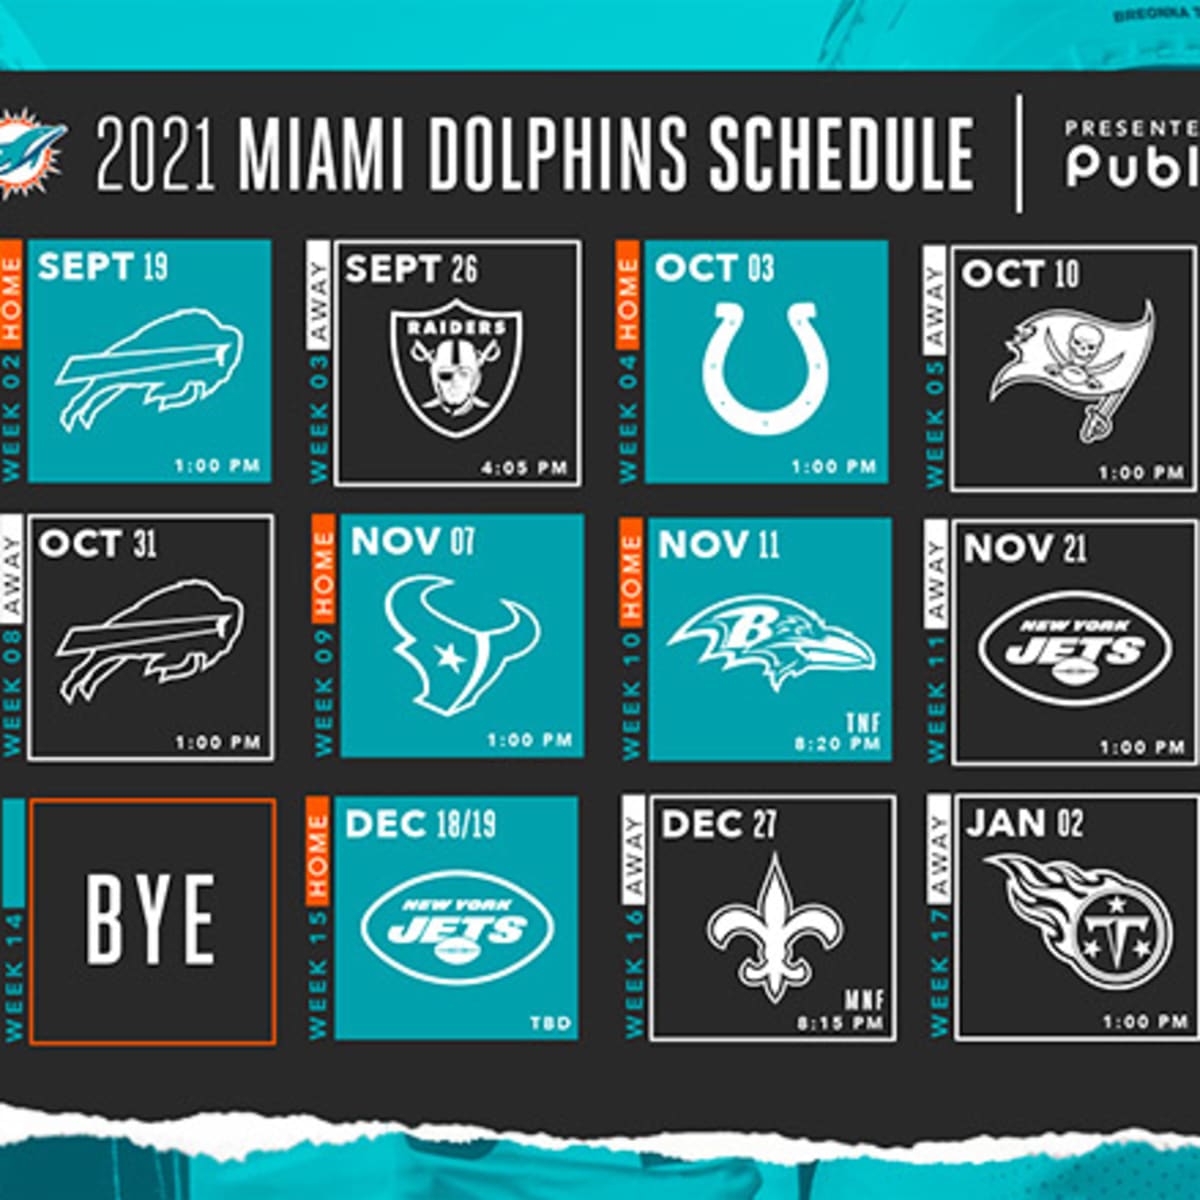 Miami Dolphins 2022 Schedule Printable Miami Dolphins Schedule 2021 - Athlonsports.com | Expert Predictions,  Picks, And Previews